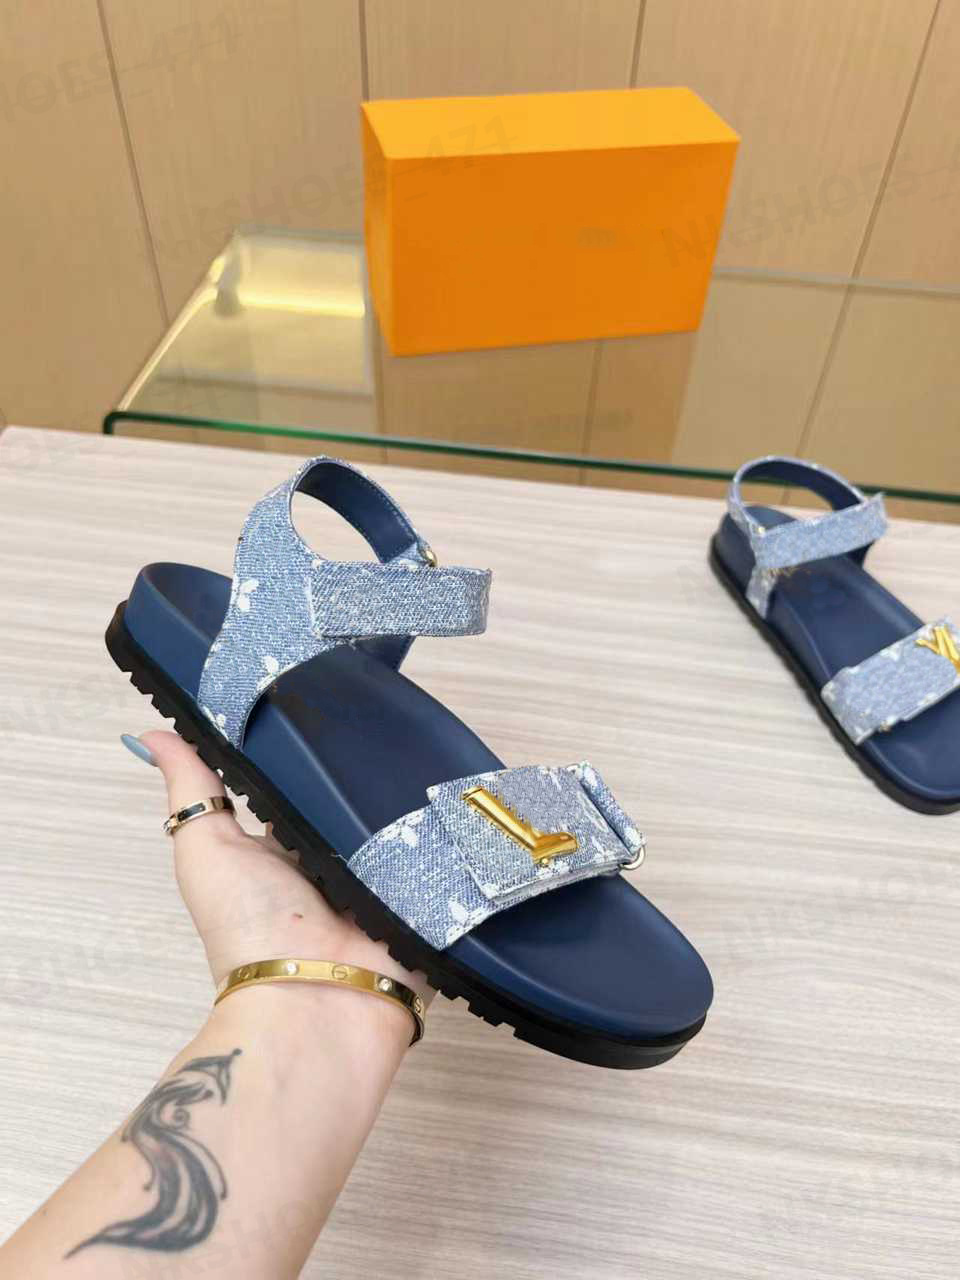 Designer Sandal Shoes SUNSET COMFORT Flat Sandals Flat Mule Slippers Cool Easy Fashion Slippers 2 Straps Adjustable Gold Buckle Women's Beach Rubber Sole Sandals